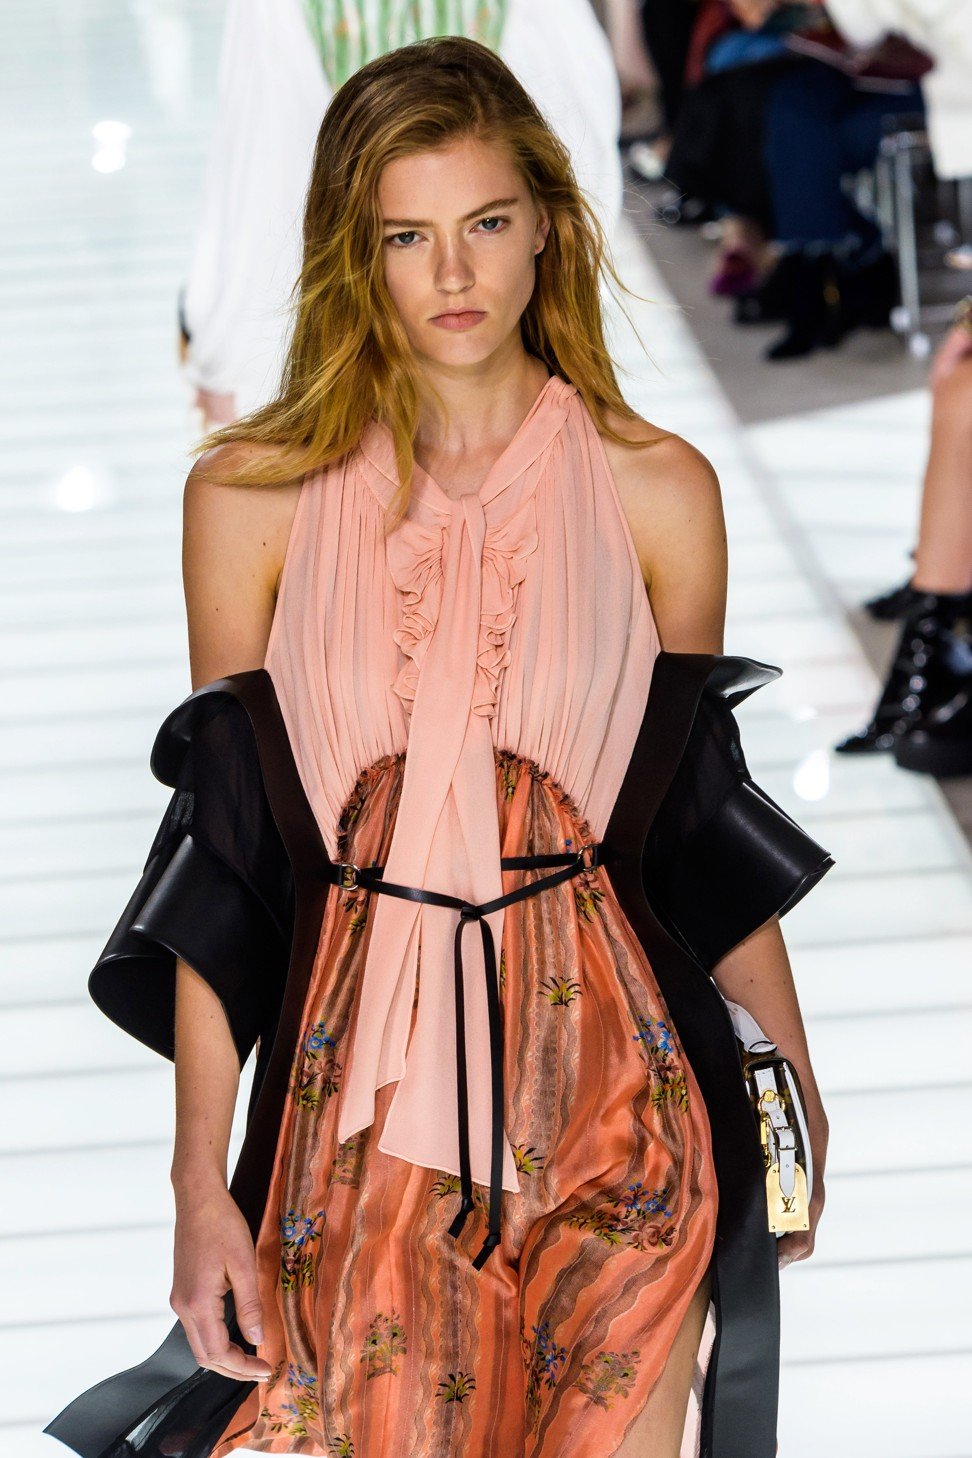 Louis Vuitton presents collection at Spring/Summer ready-to-wear